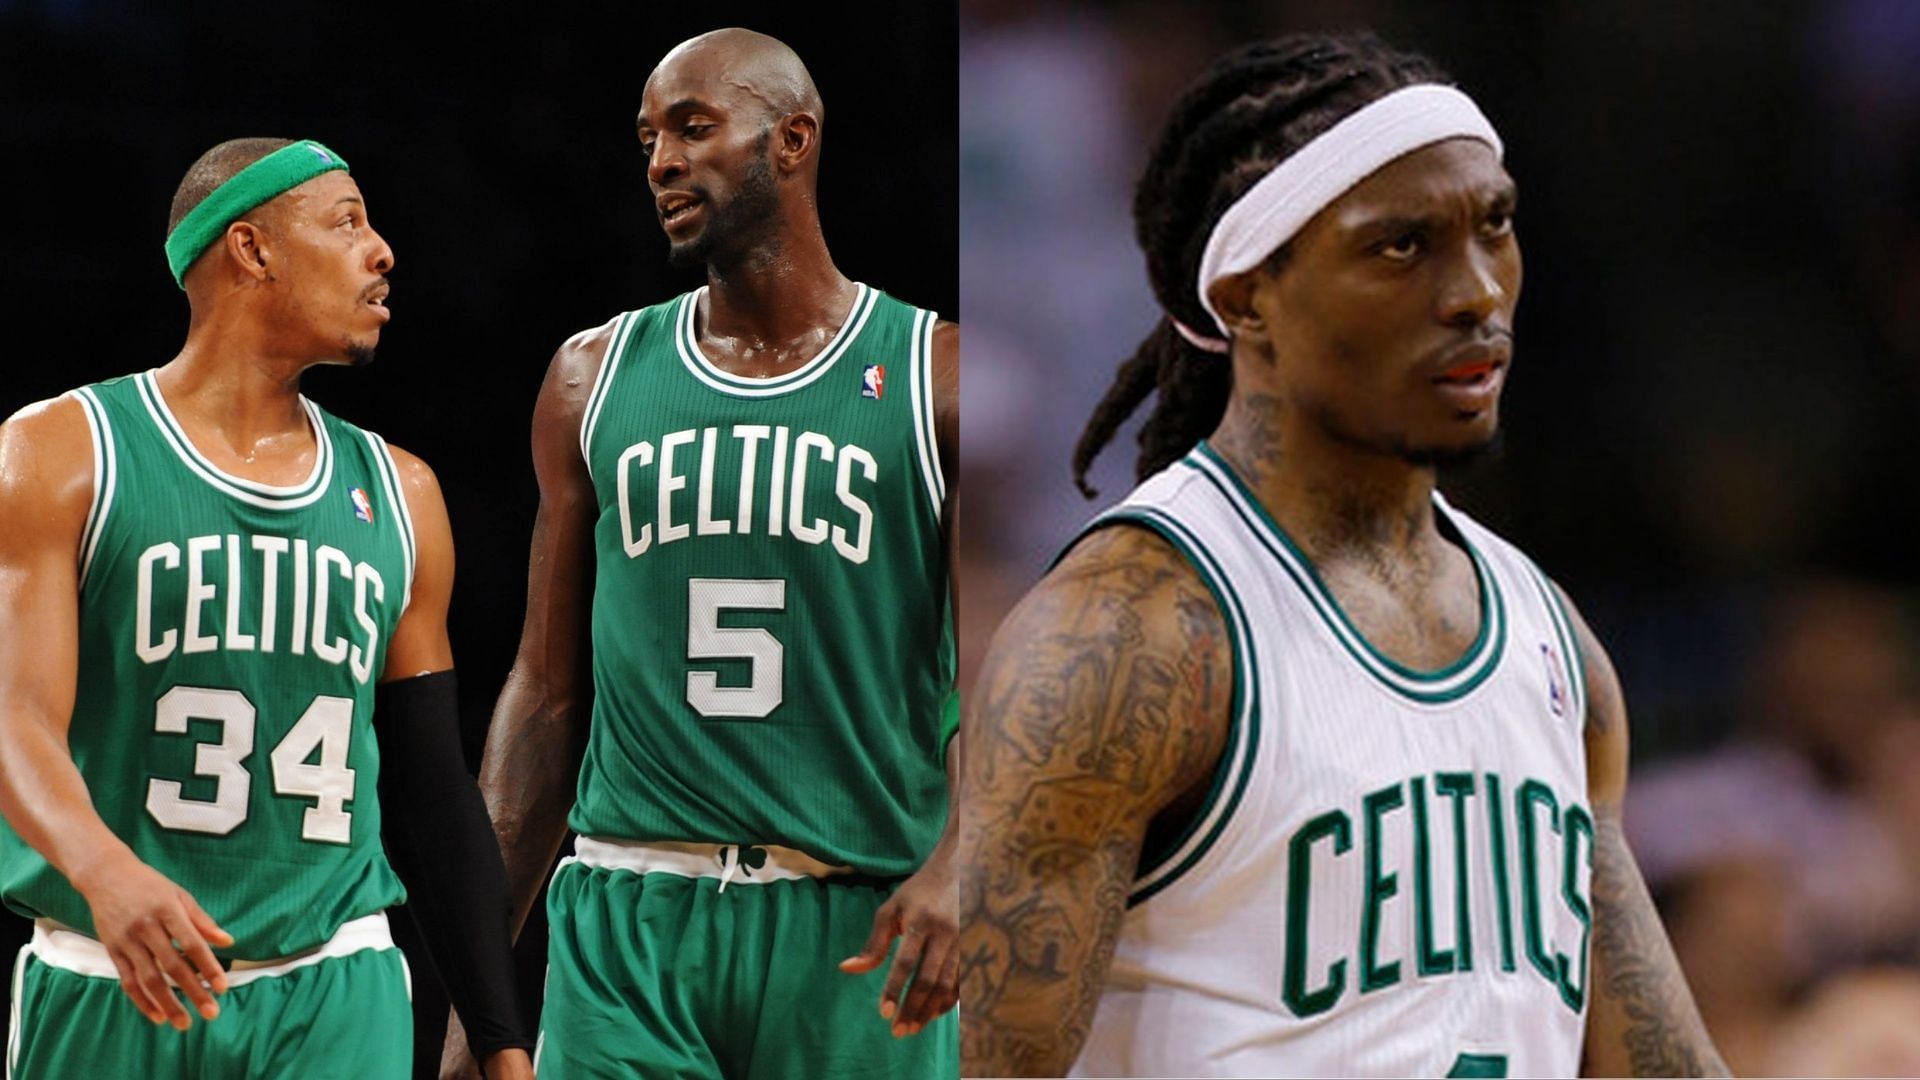 Former Boston Celtics player Marquis Daniels talks about his time with the team